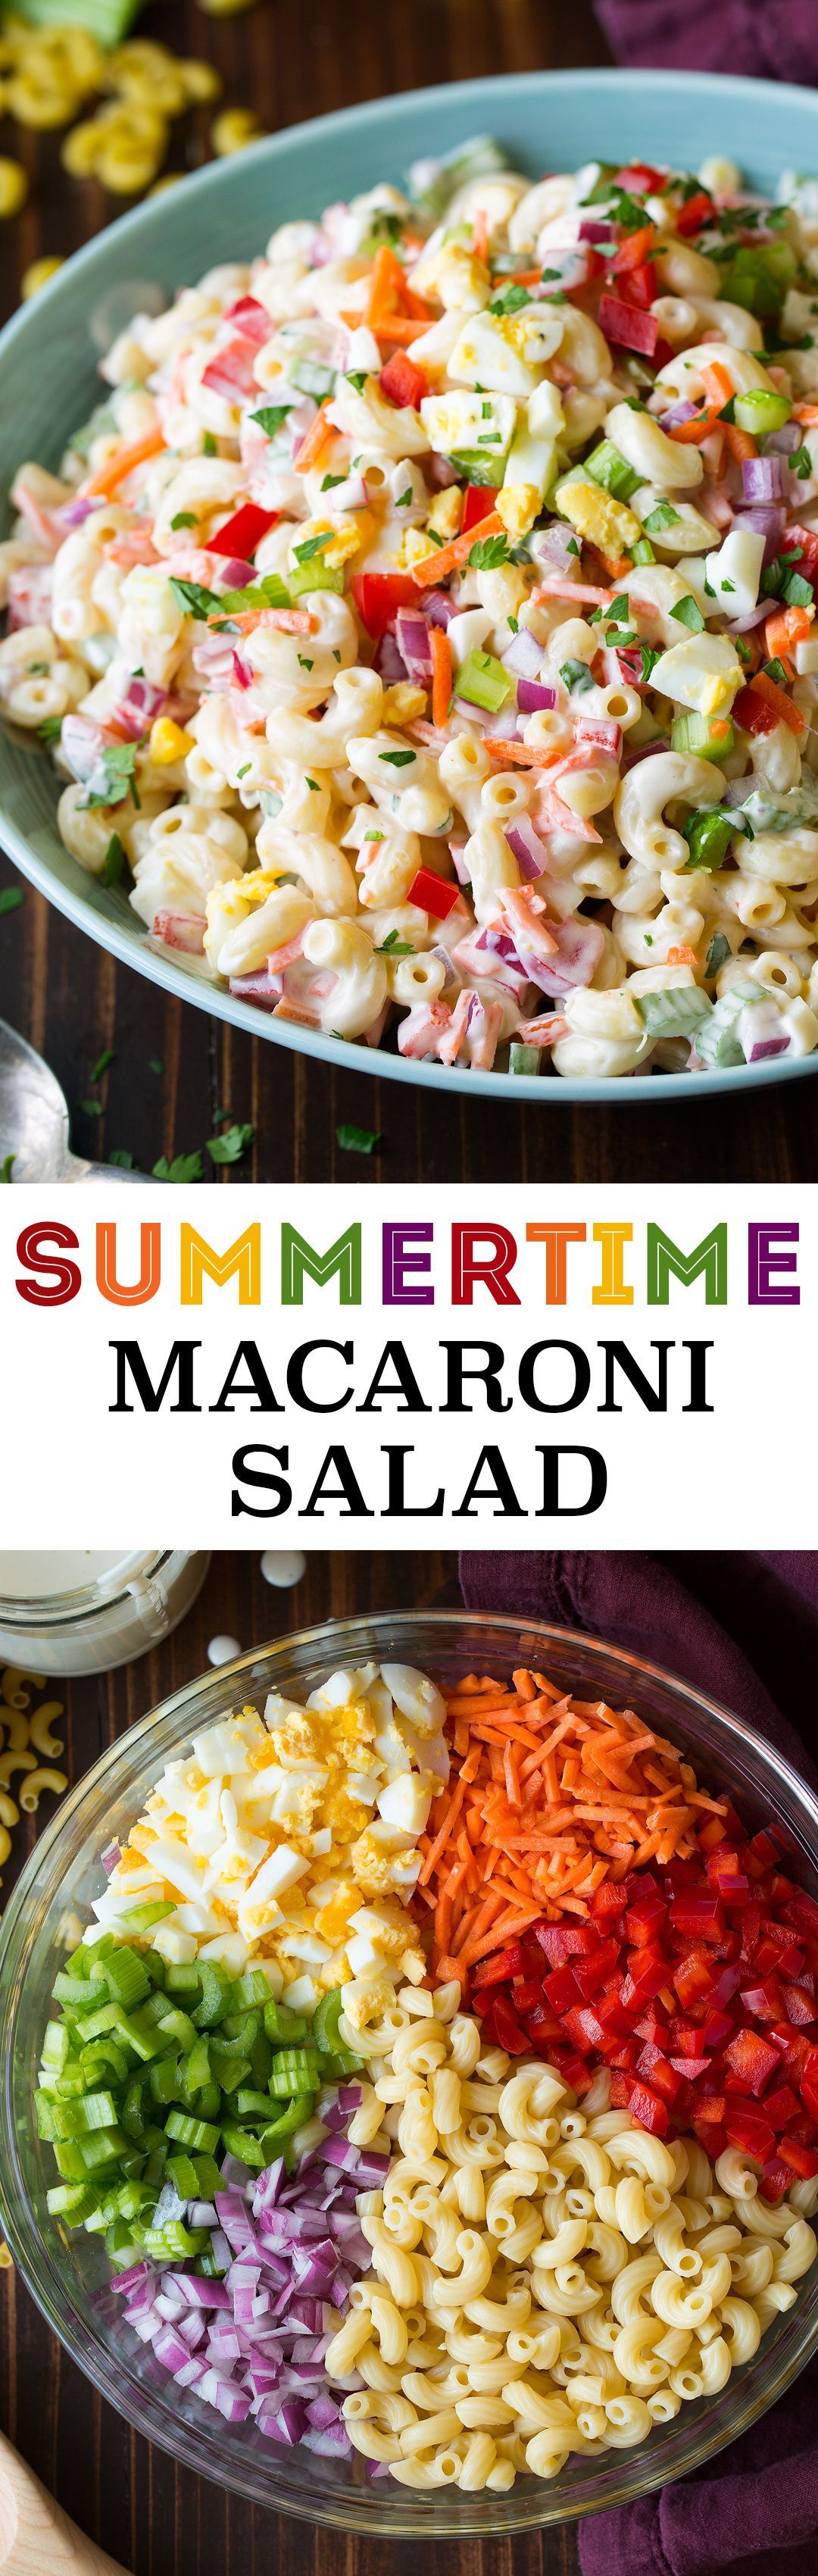 Macaroni salad is one of those things that I haven’t always appreciated. I would always walk right past pasta #salads and